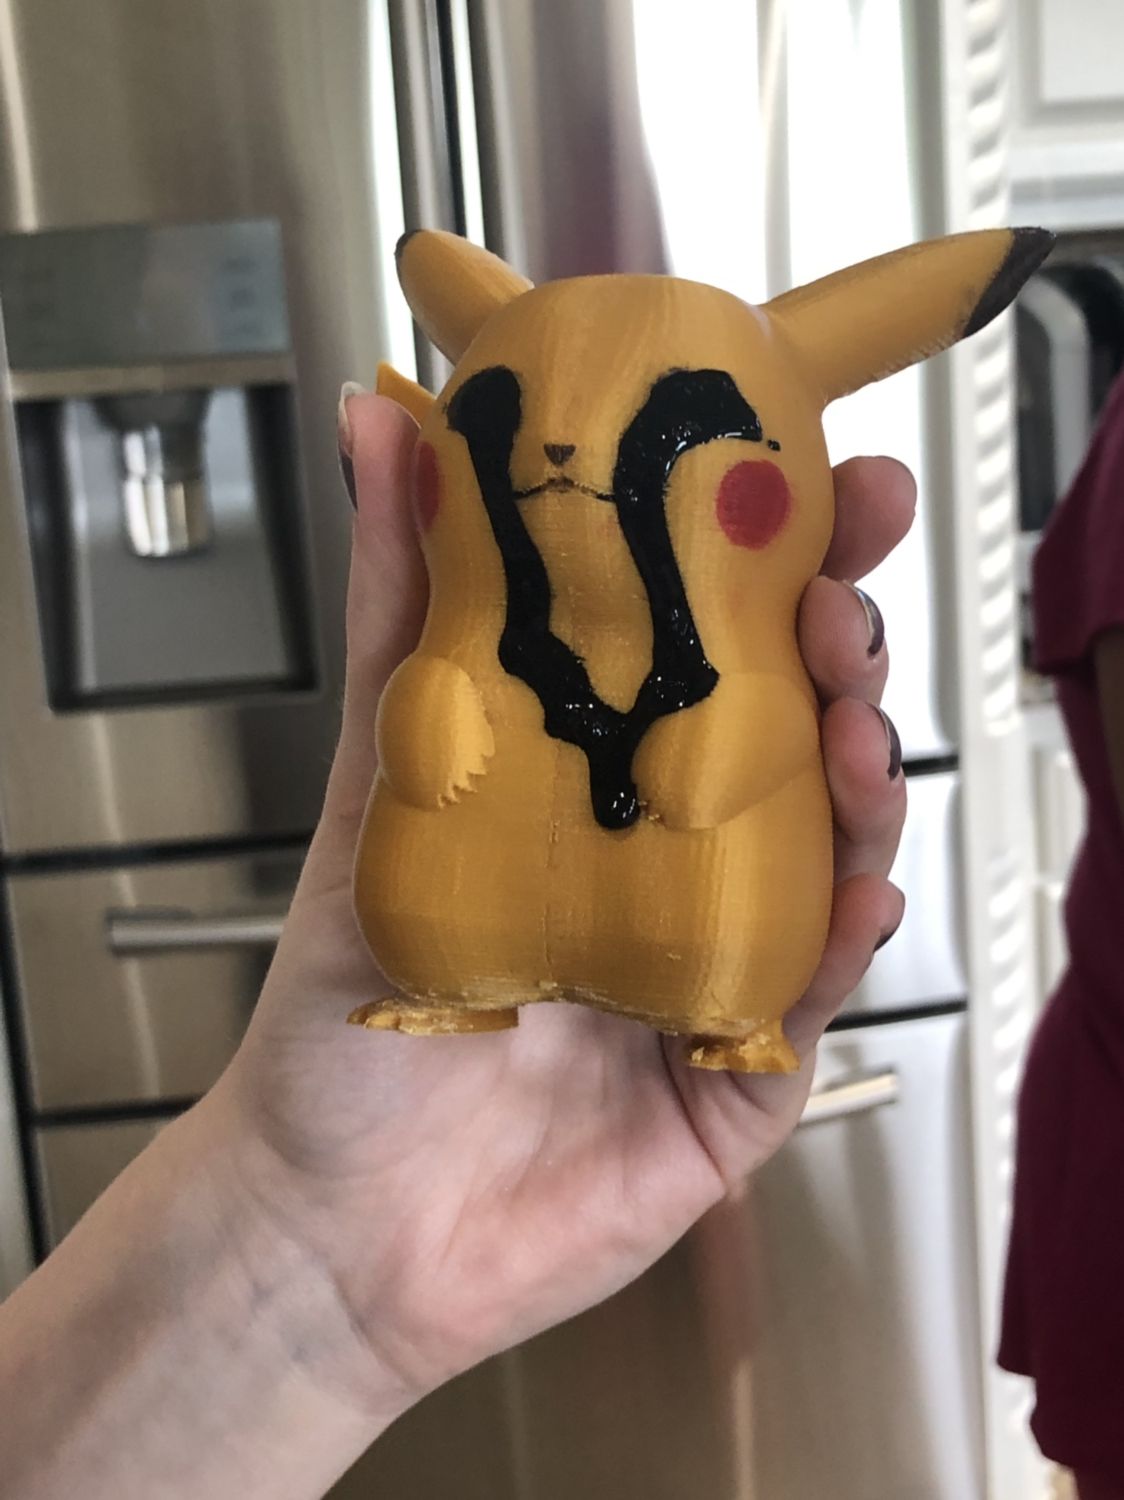 Detailing a 3D printed Pikachu did NOT go as planned